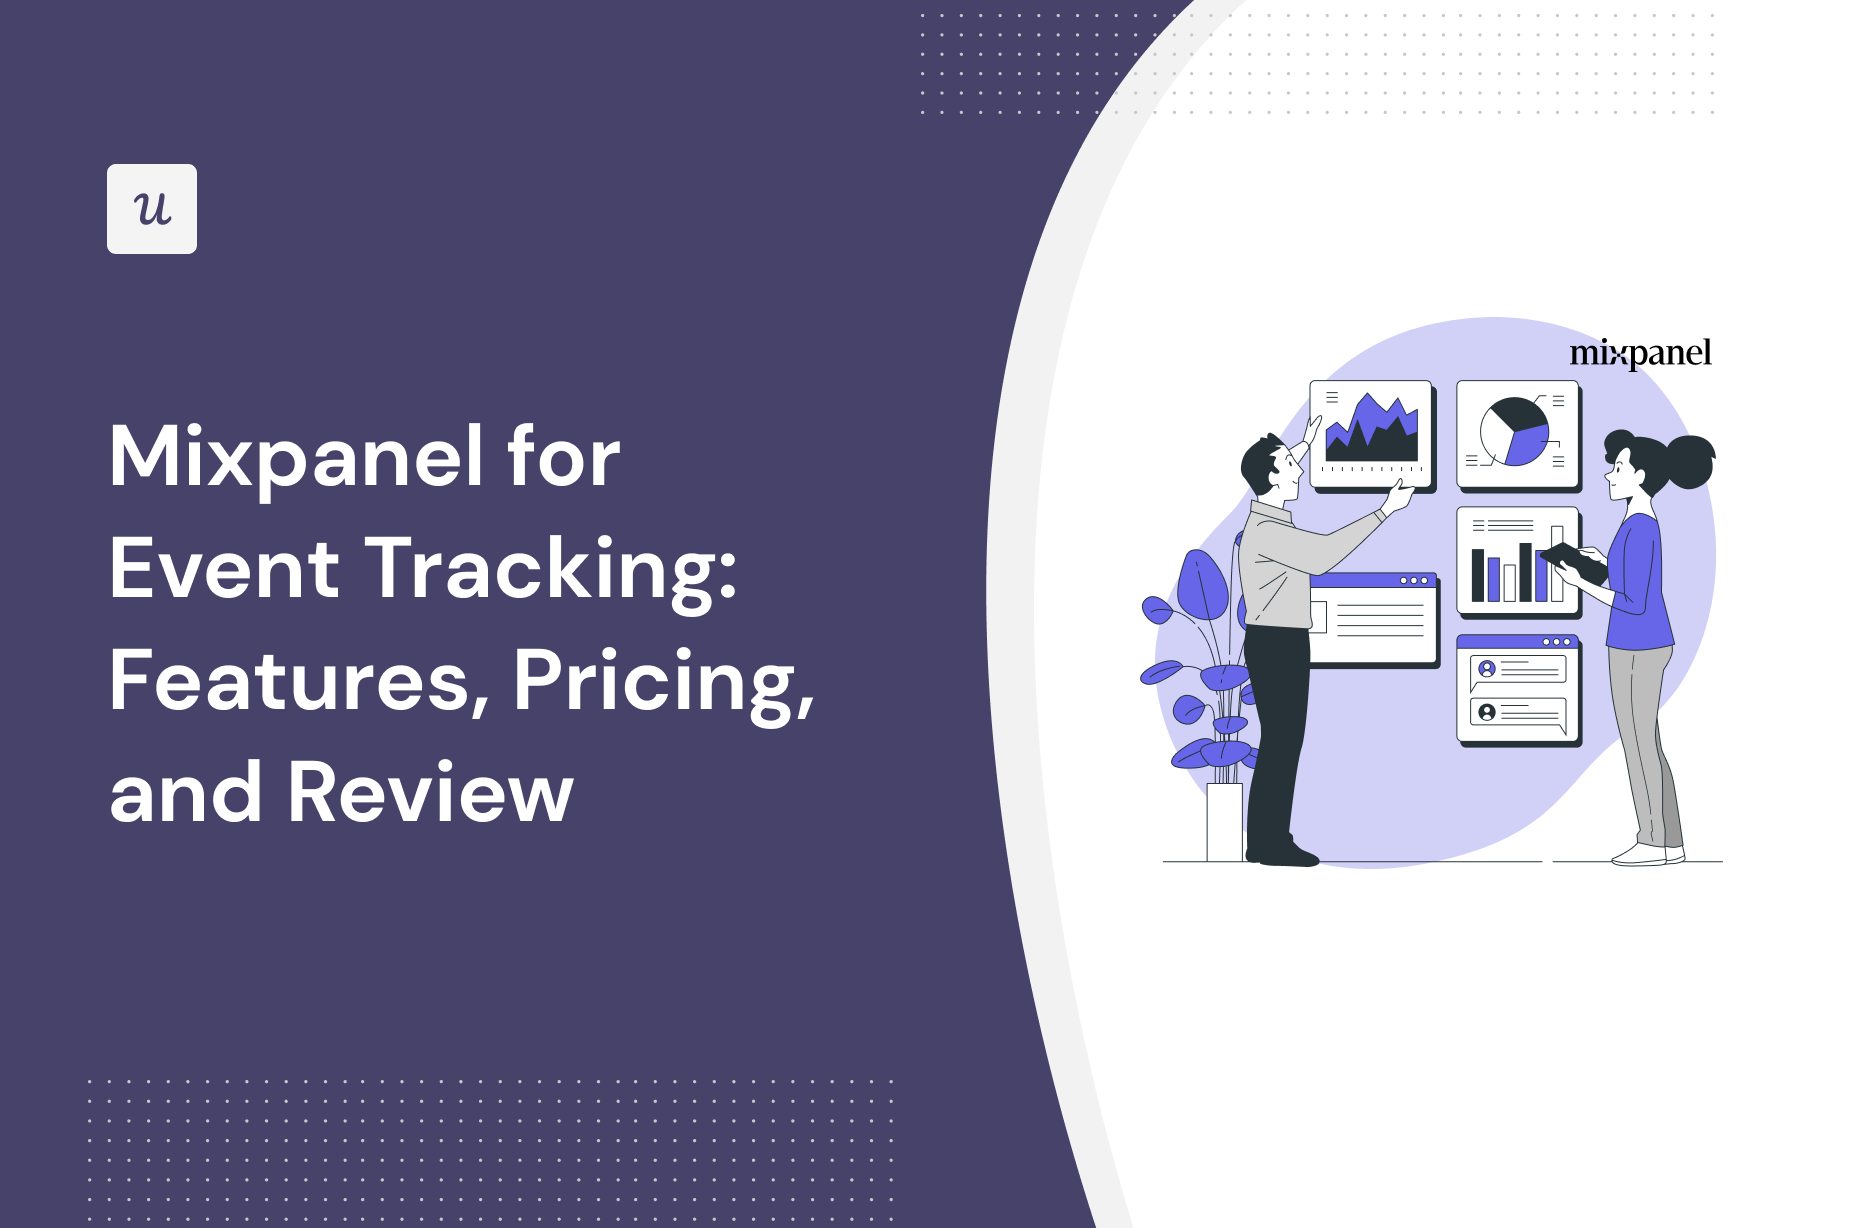 Mixpanel for Event Tracking: Features, Pricing, and Review